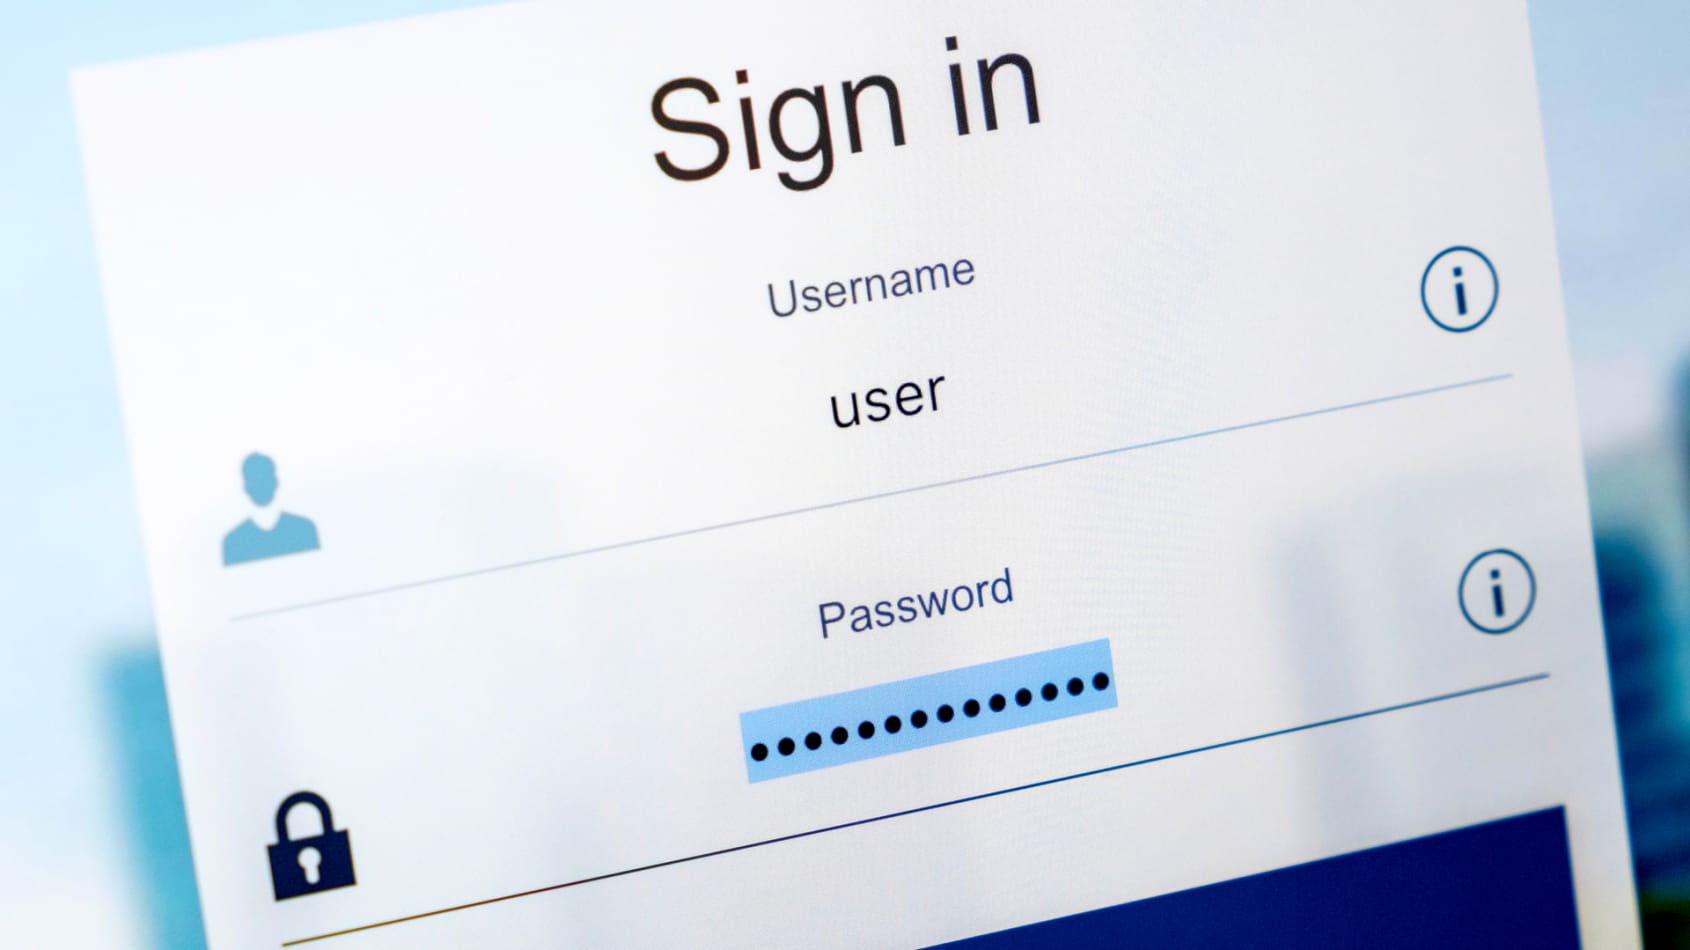 44 million Microsoft customers found using compromised passwords